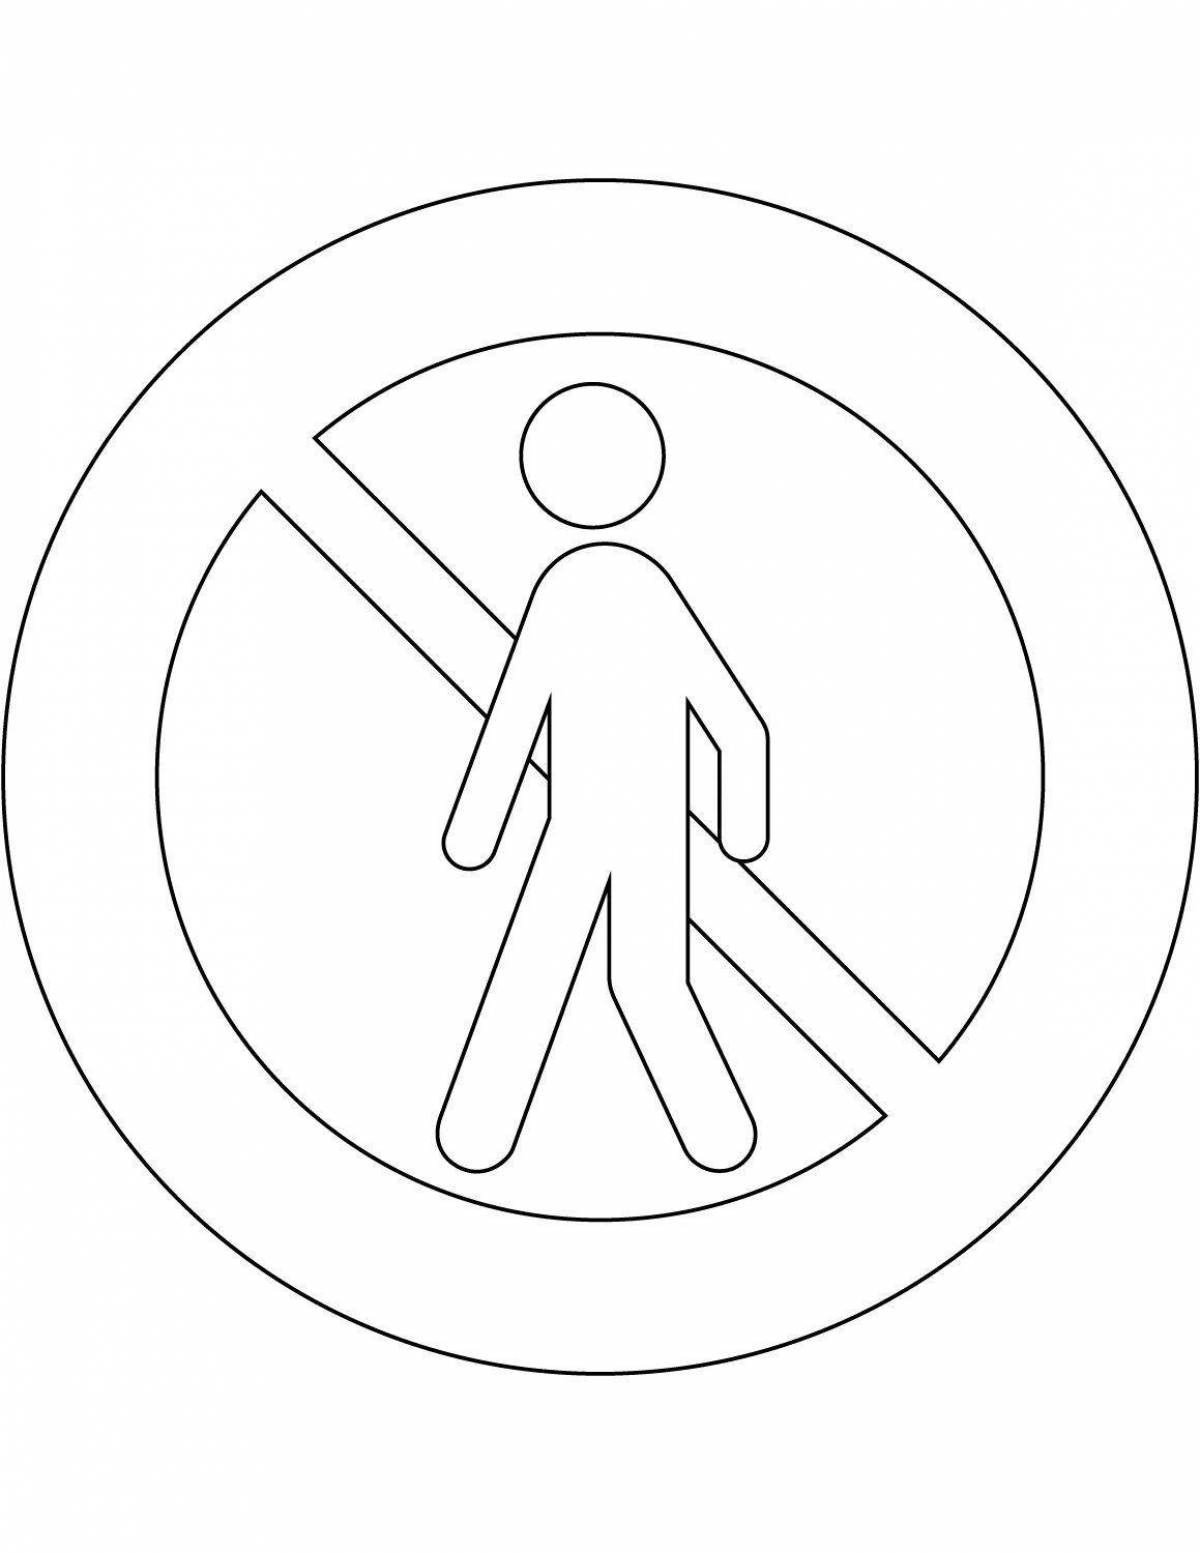 Coloring page of the inviting footpath sign